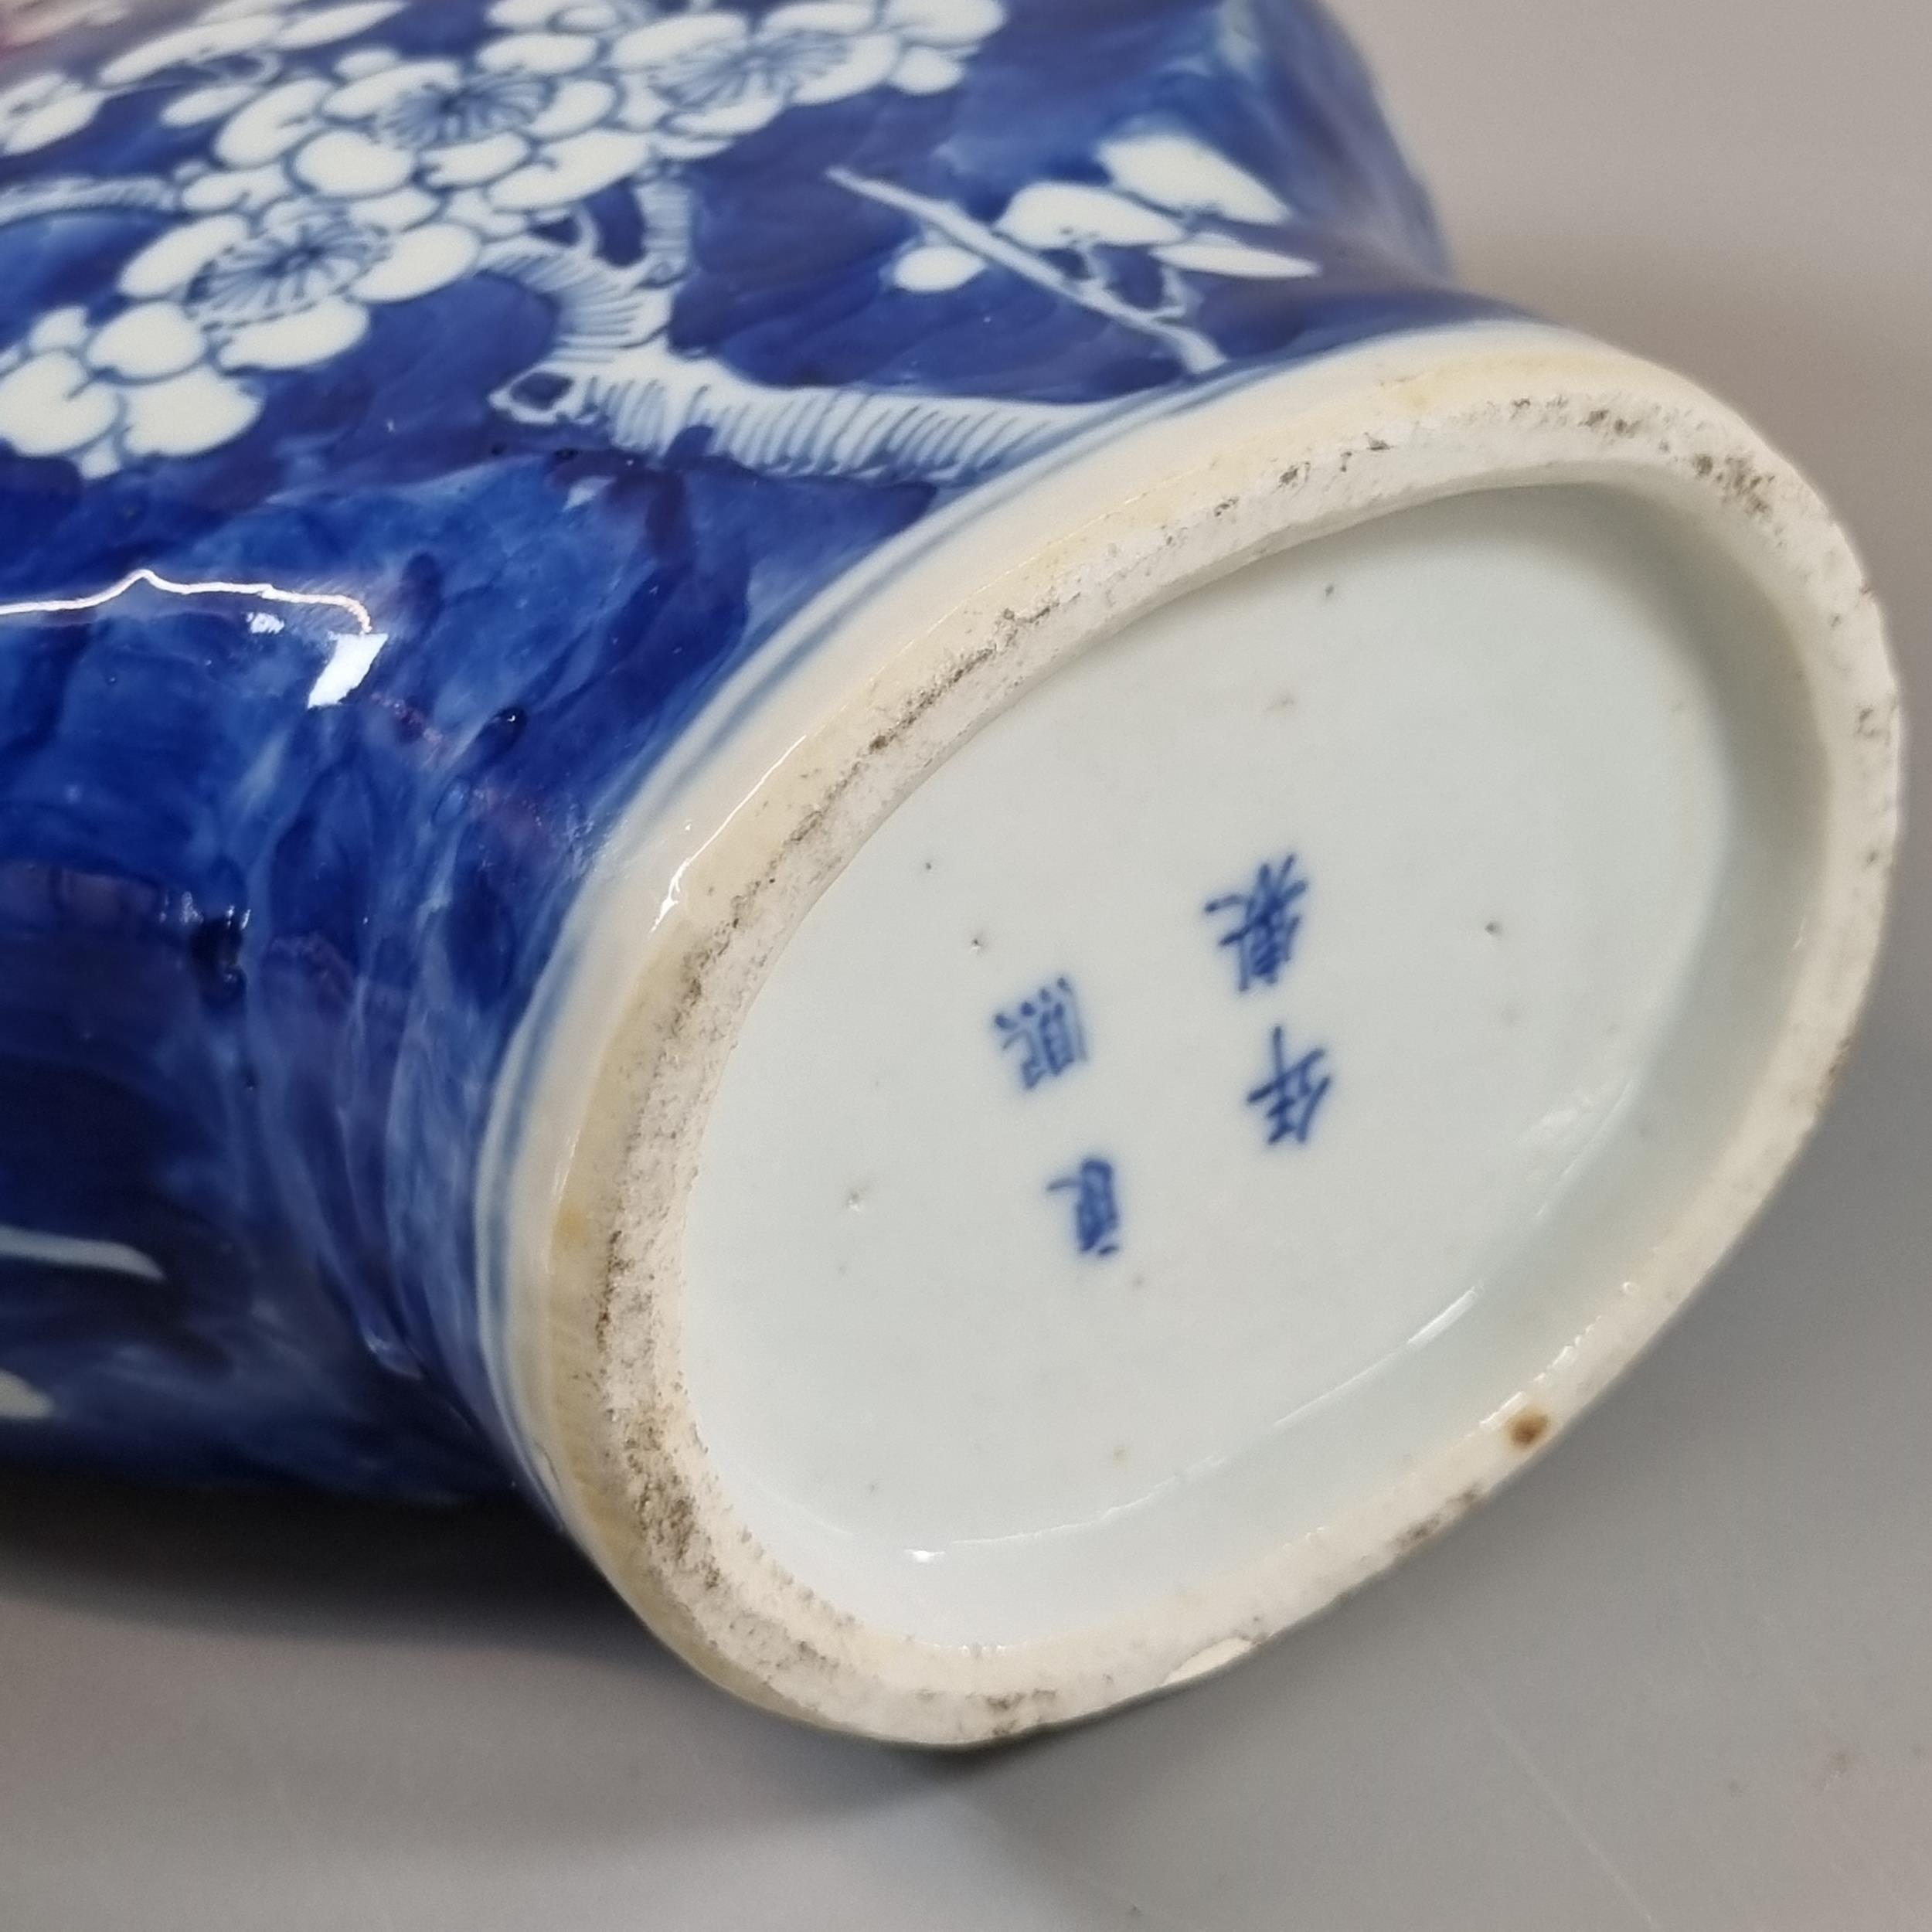 19th century Chinese export porcelain blue and white moon flask, depicting flower and prunus - Image 3 of 12